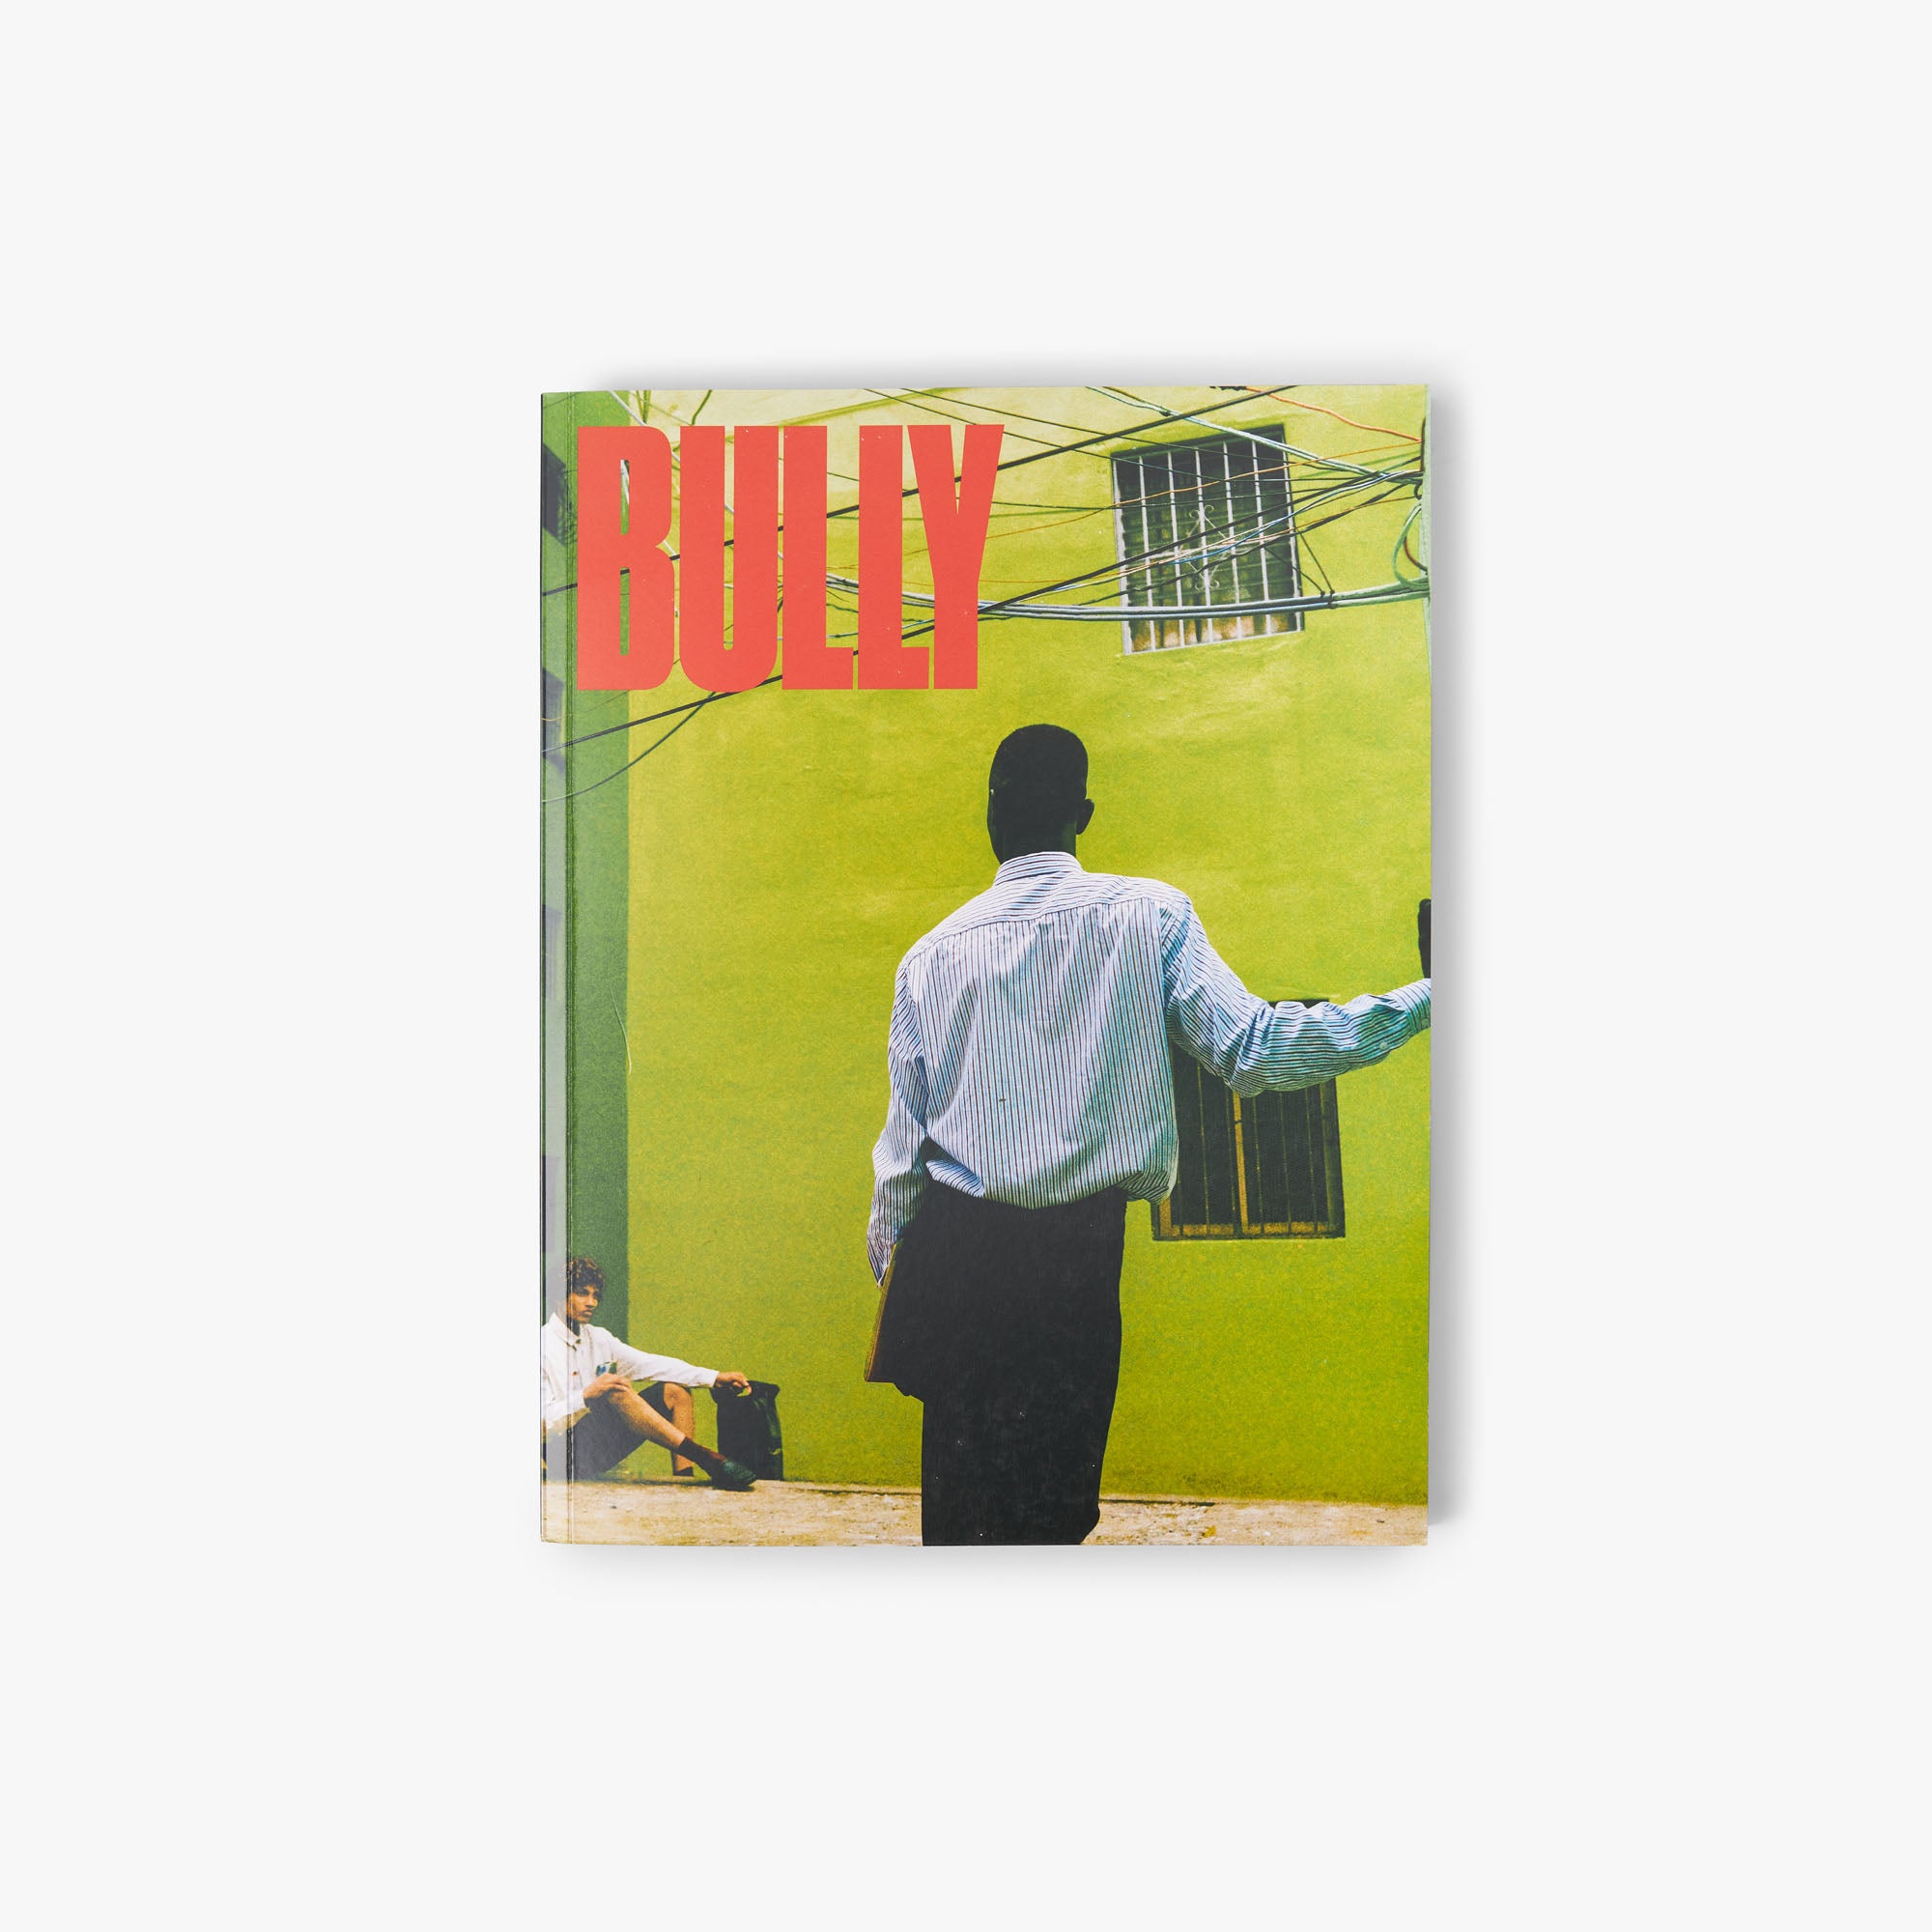 Bully Magazine Issue Two / Kenoly & Shaballah Cover 1